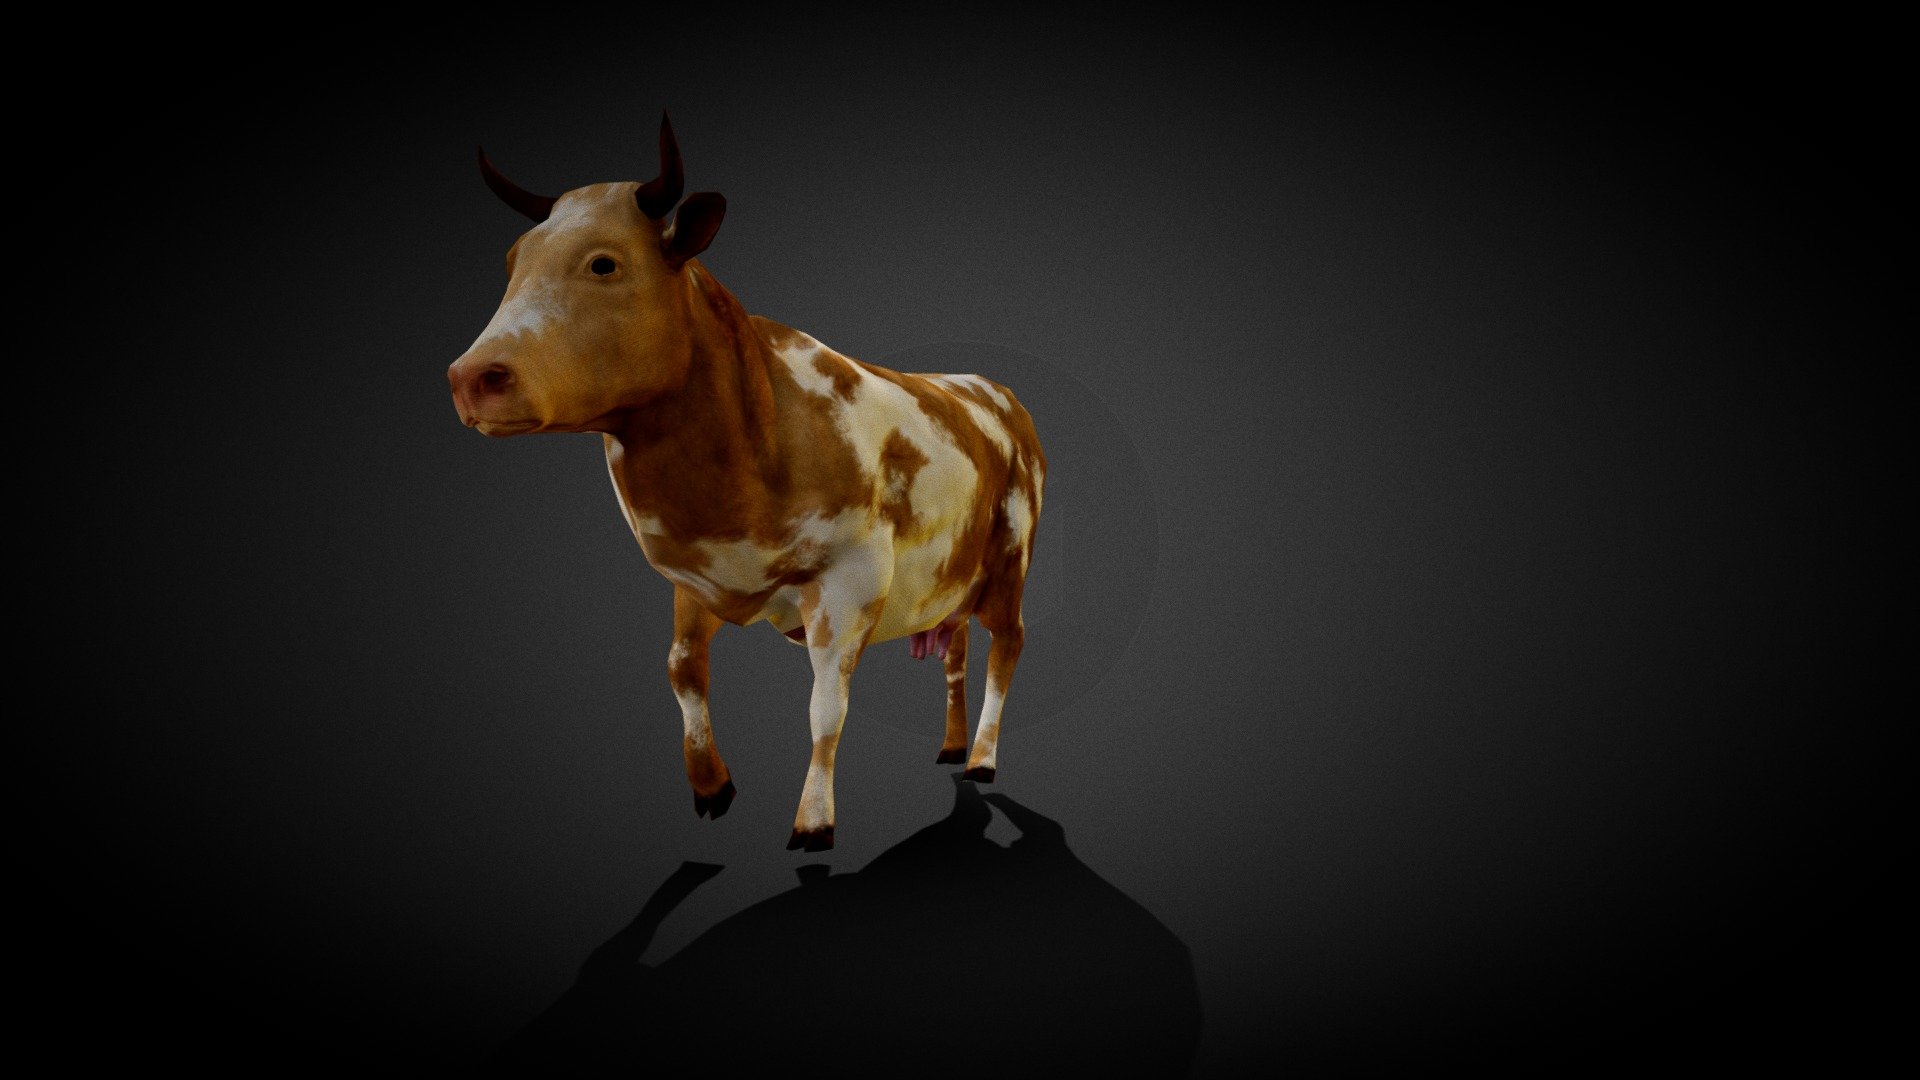 Cow animated
Ready for games 3d model